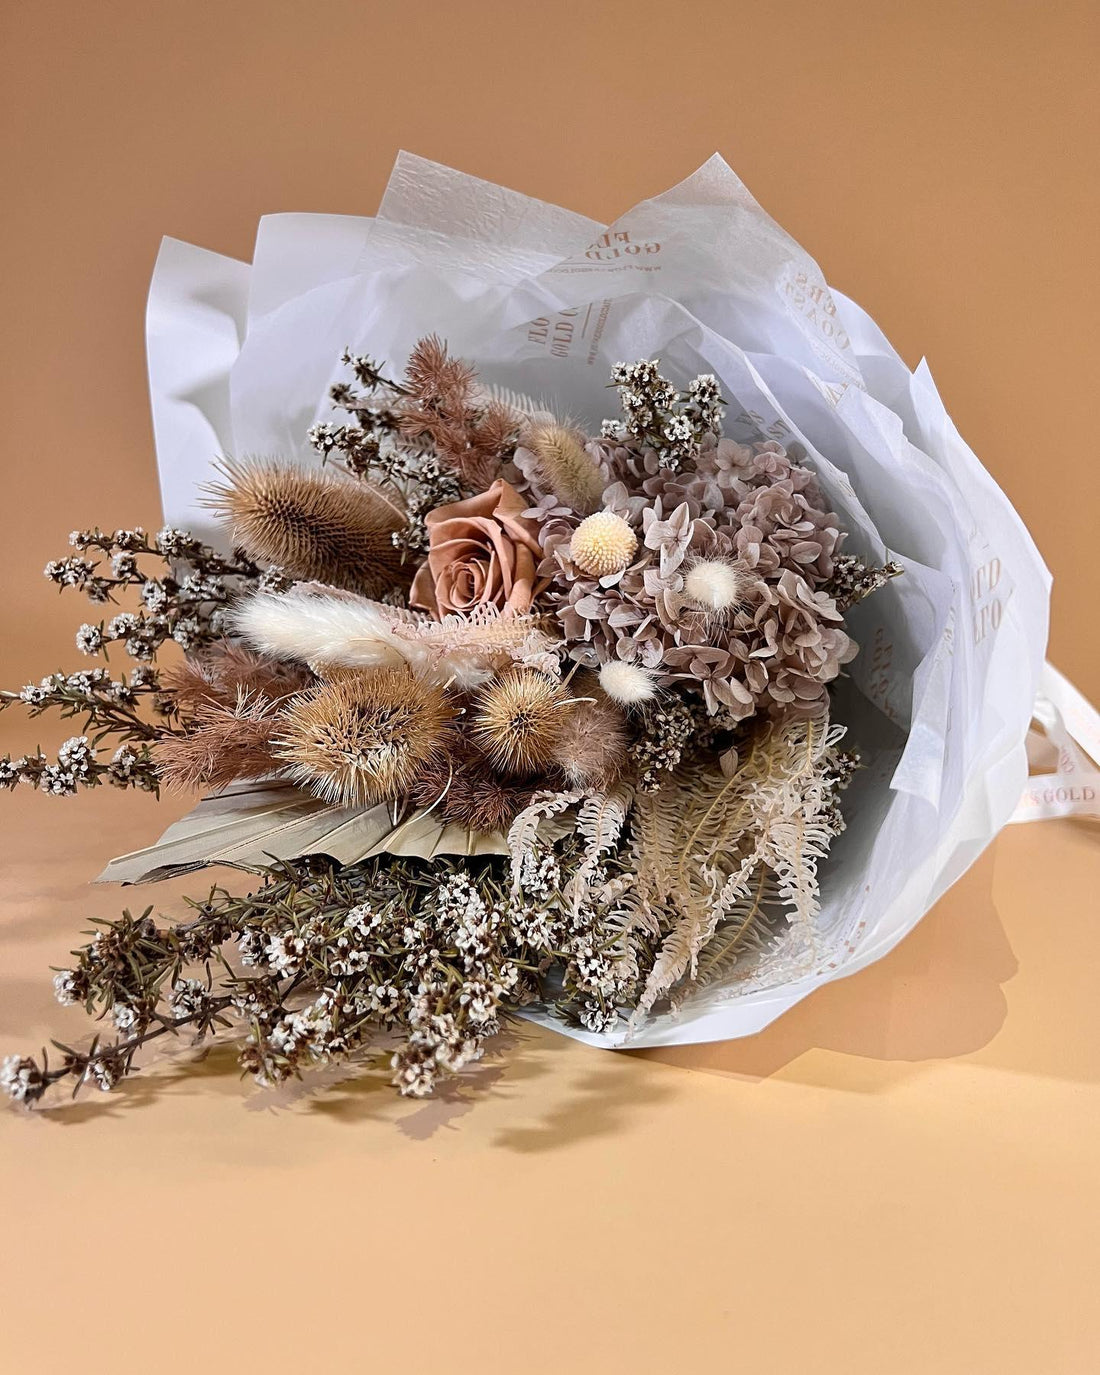 Meet Nudie 👡🐚 - this Dried arrangement is exquisite 🍨🧋<br />
<br />
Feel the Latte and C - Flowers Gold Coast